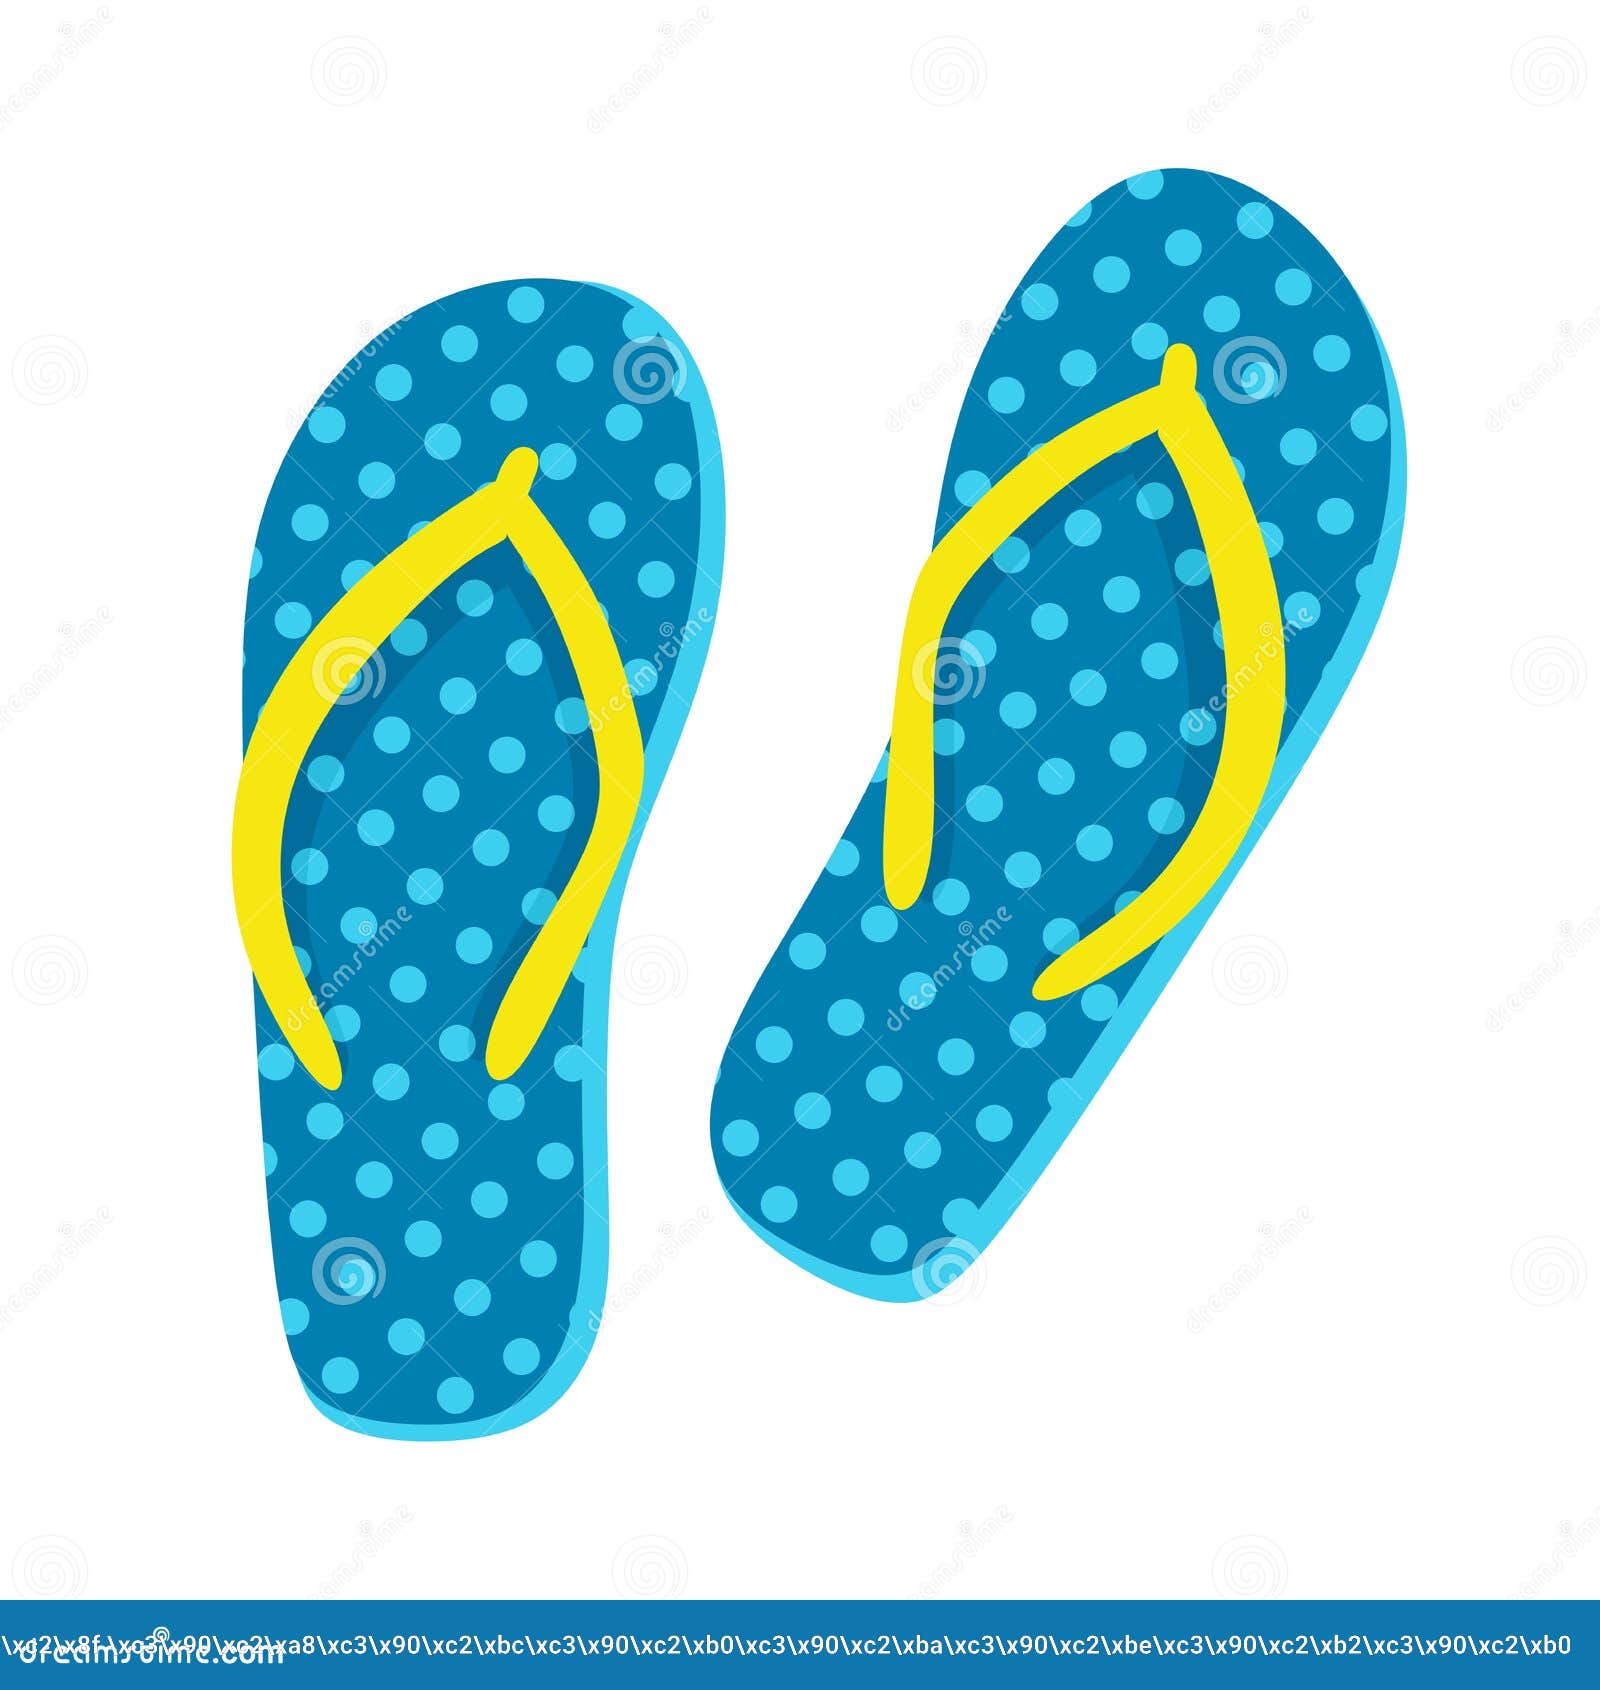 Flip Flops Shoes Slates in Cartoon Style Vector Illustration Isolated ...